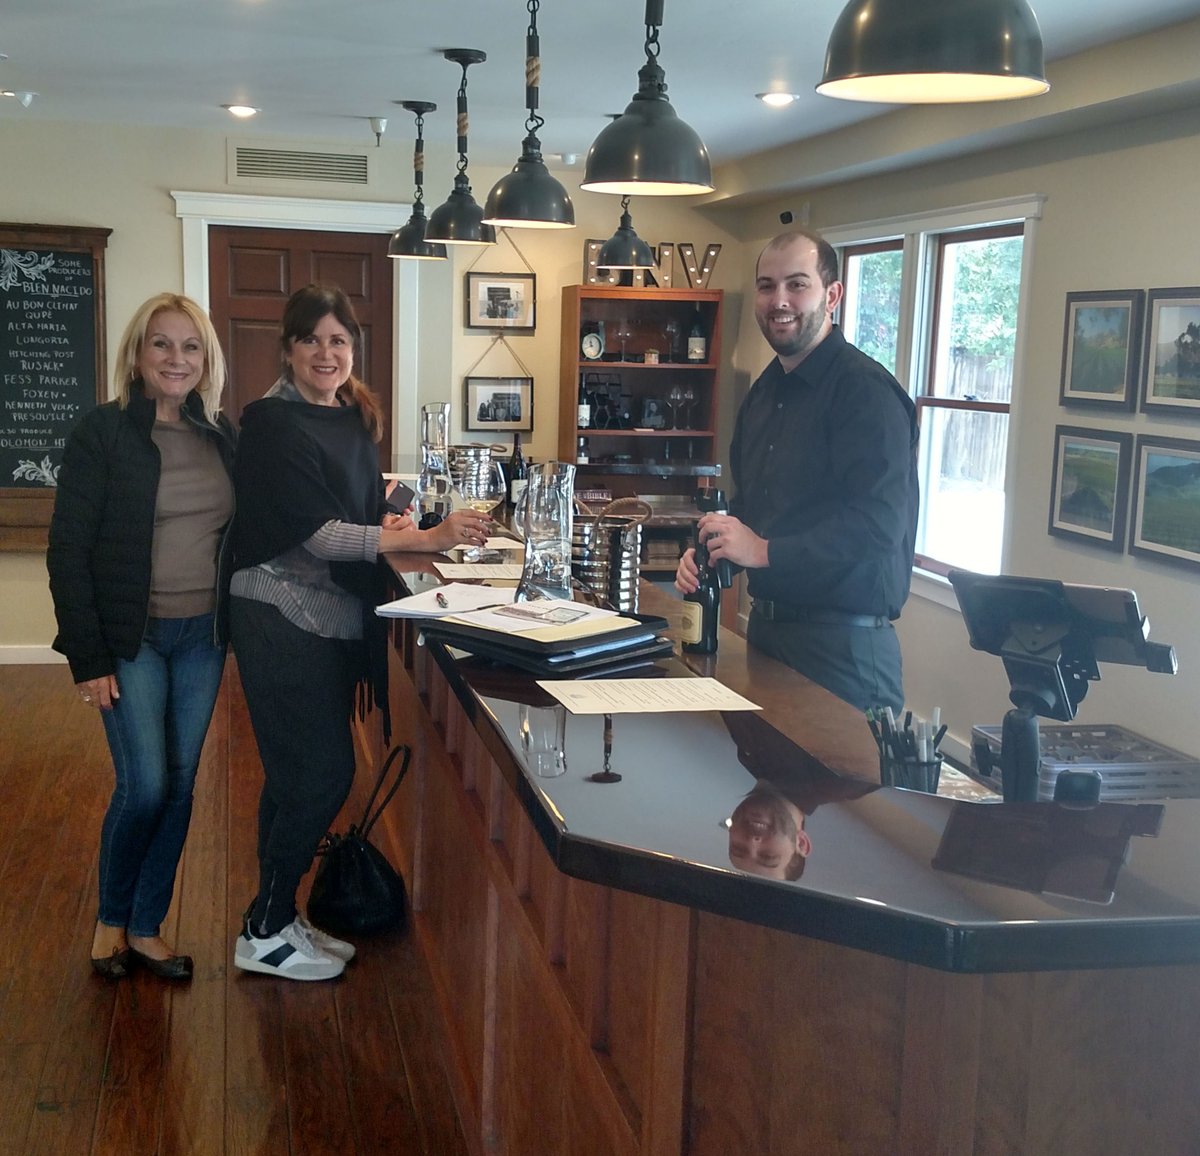 @BienNacido A 40 year commitment to community and environment, opened a tasting room in 2015 #pasorobleswine bit.ly/2foH1Qx